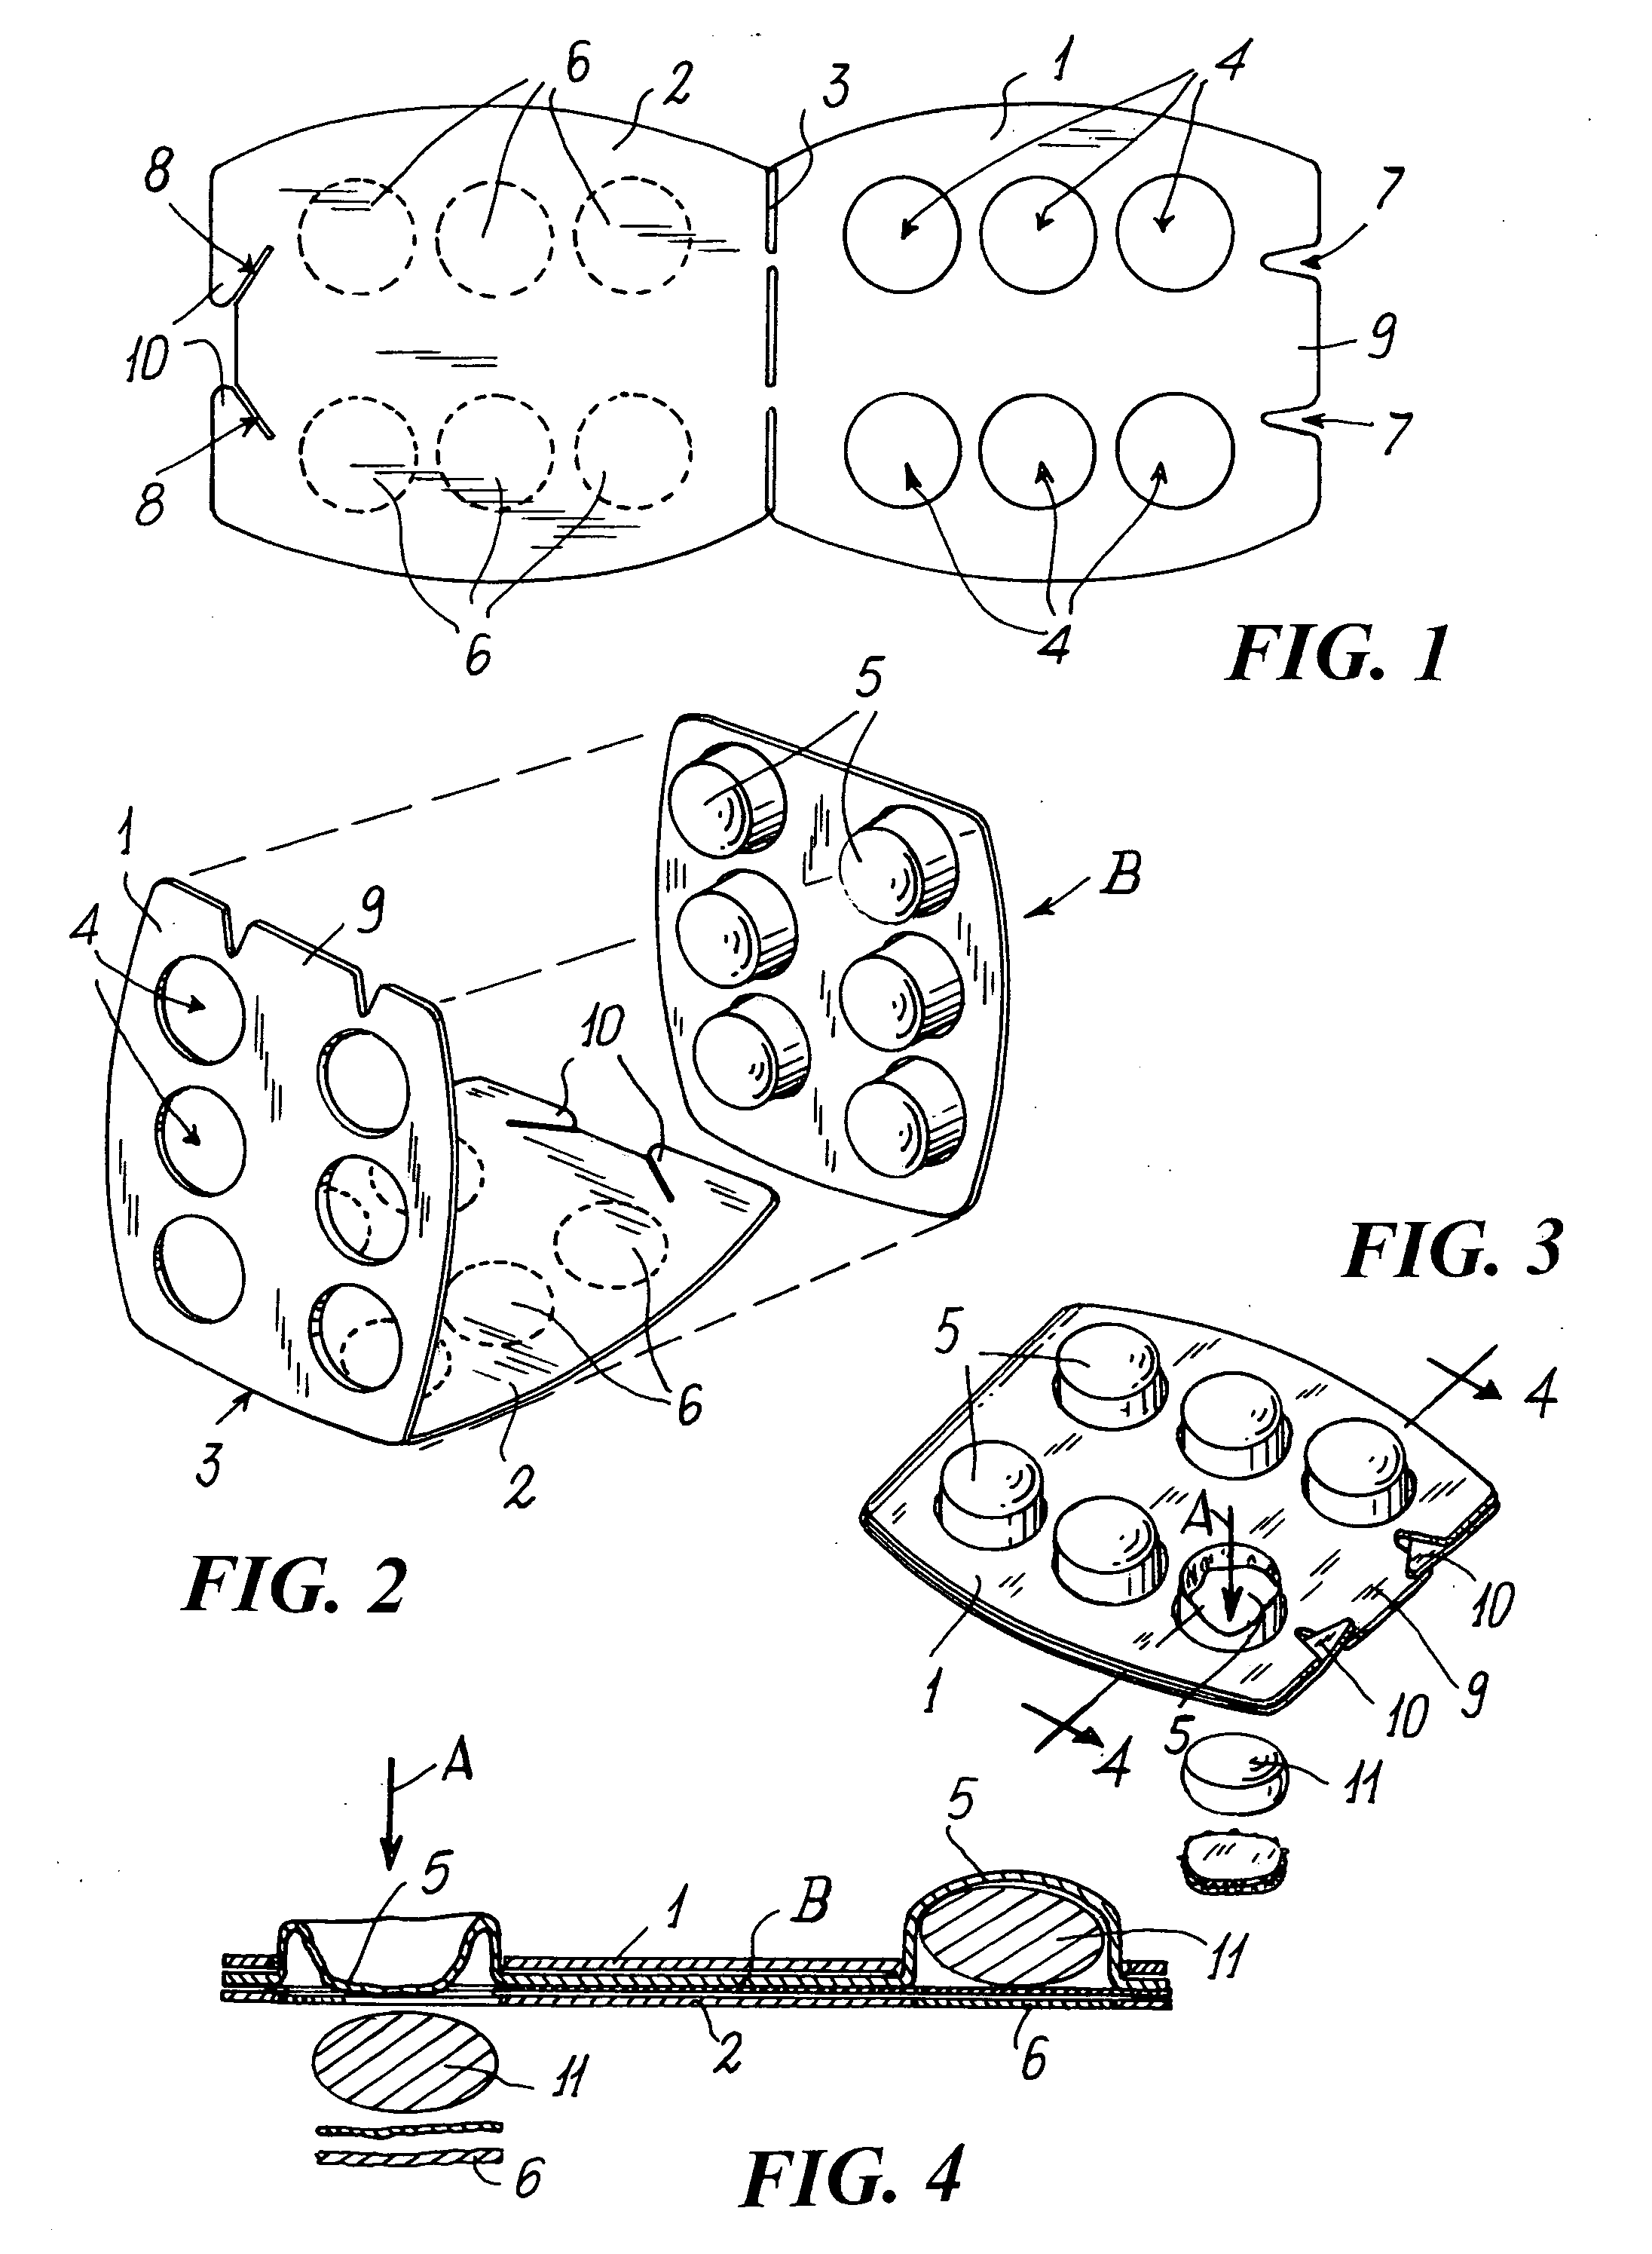 Device for selectively dispensing solid products from a blister strip retained in the device